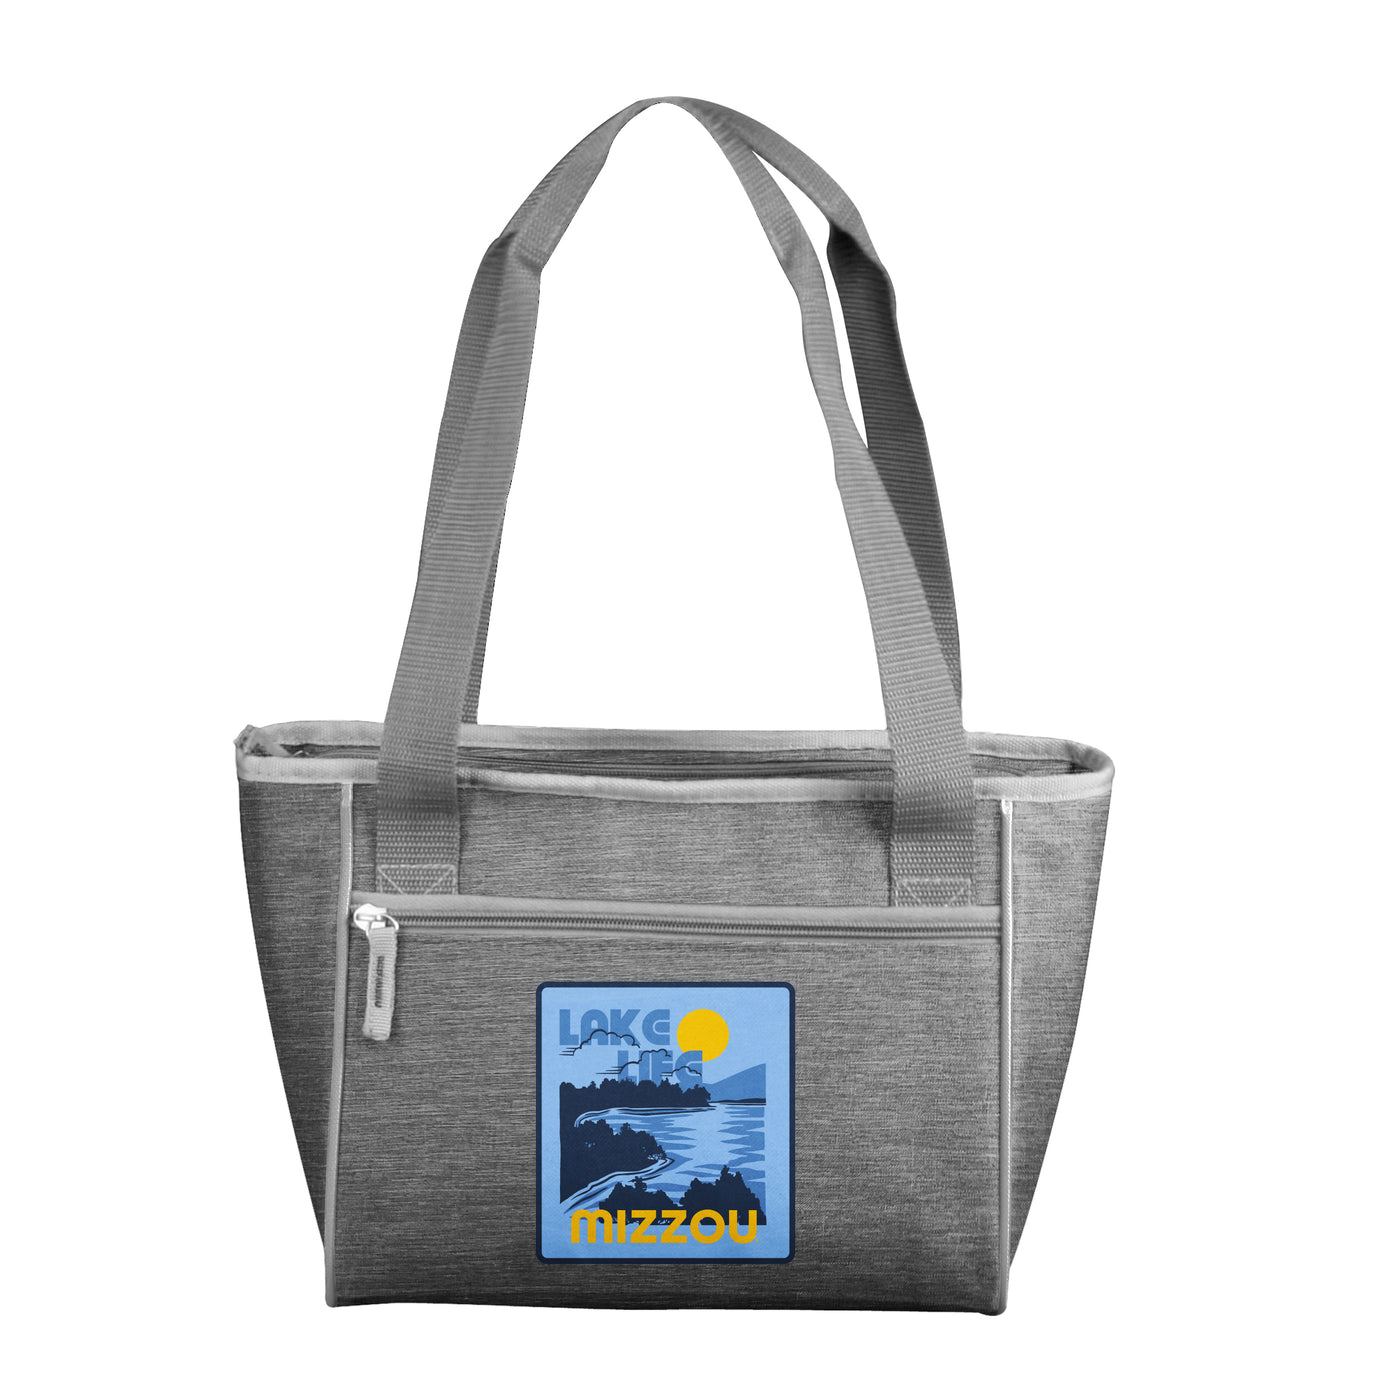 Missouri Lake Vibes 16 Charcoal Can Cooler Tote